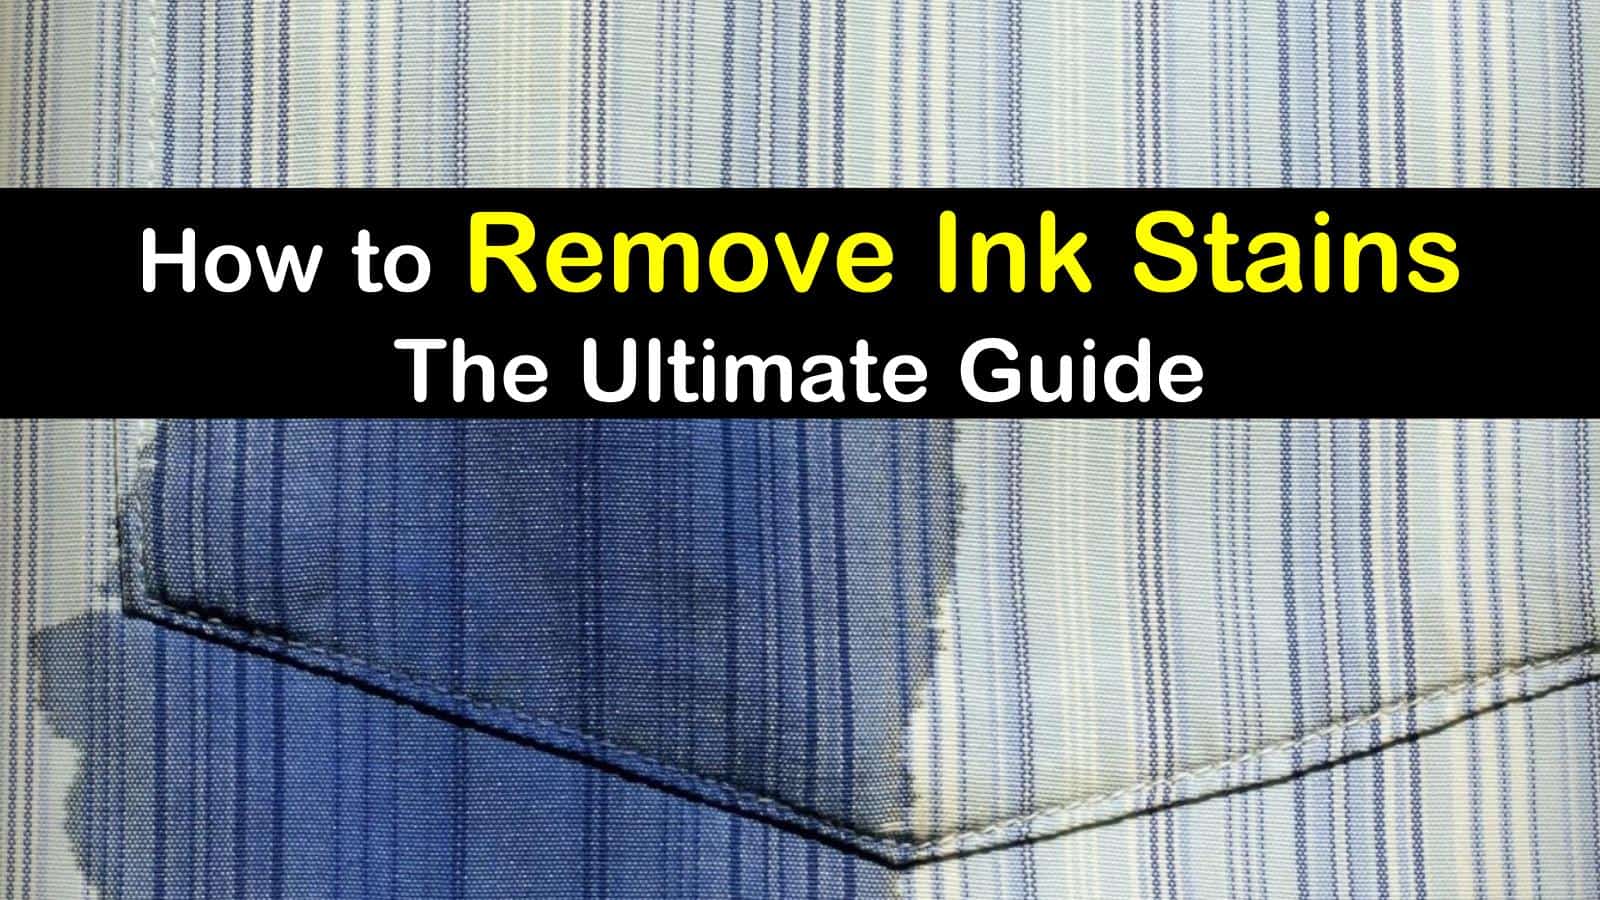 how to remove ink stains titleimg1